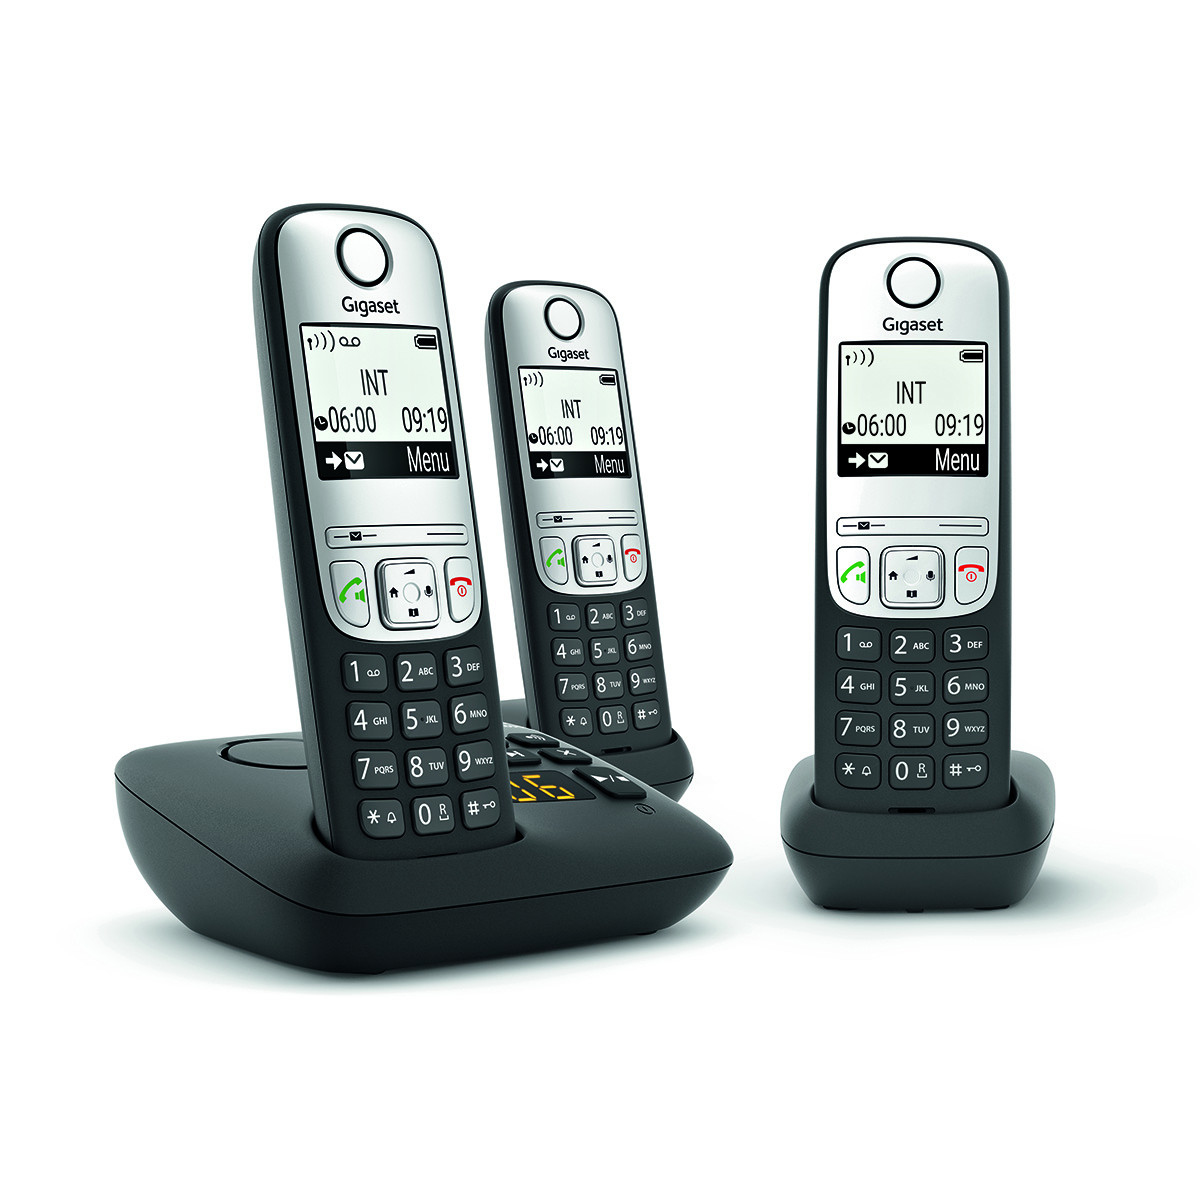 L36852-H2830-B111 UNIFY GIGASET OPENSTAGE A690A - Analog/DECT telephone - Wireless handset - Speakerphone - 100 entries - Caller ID - Black